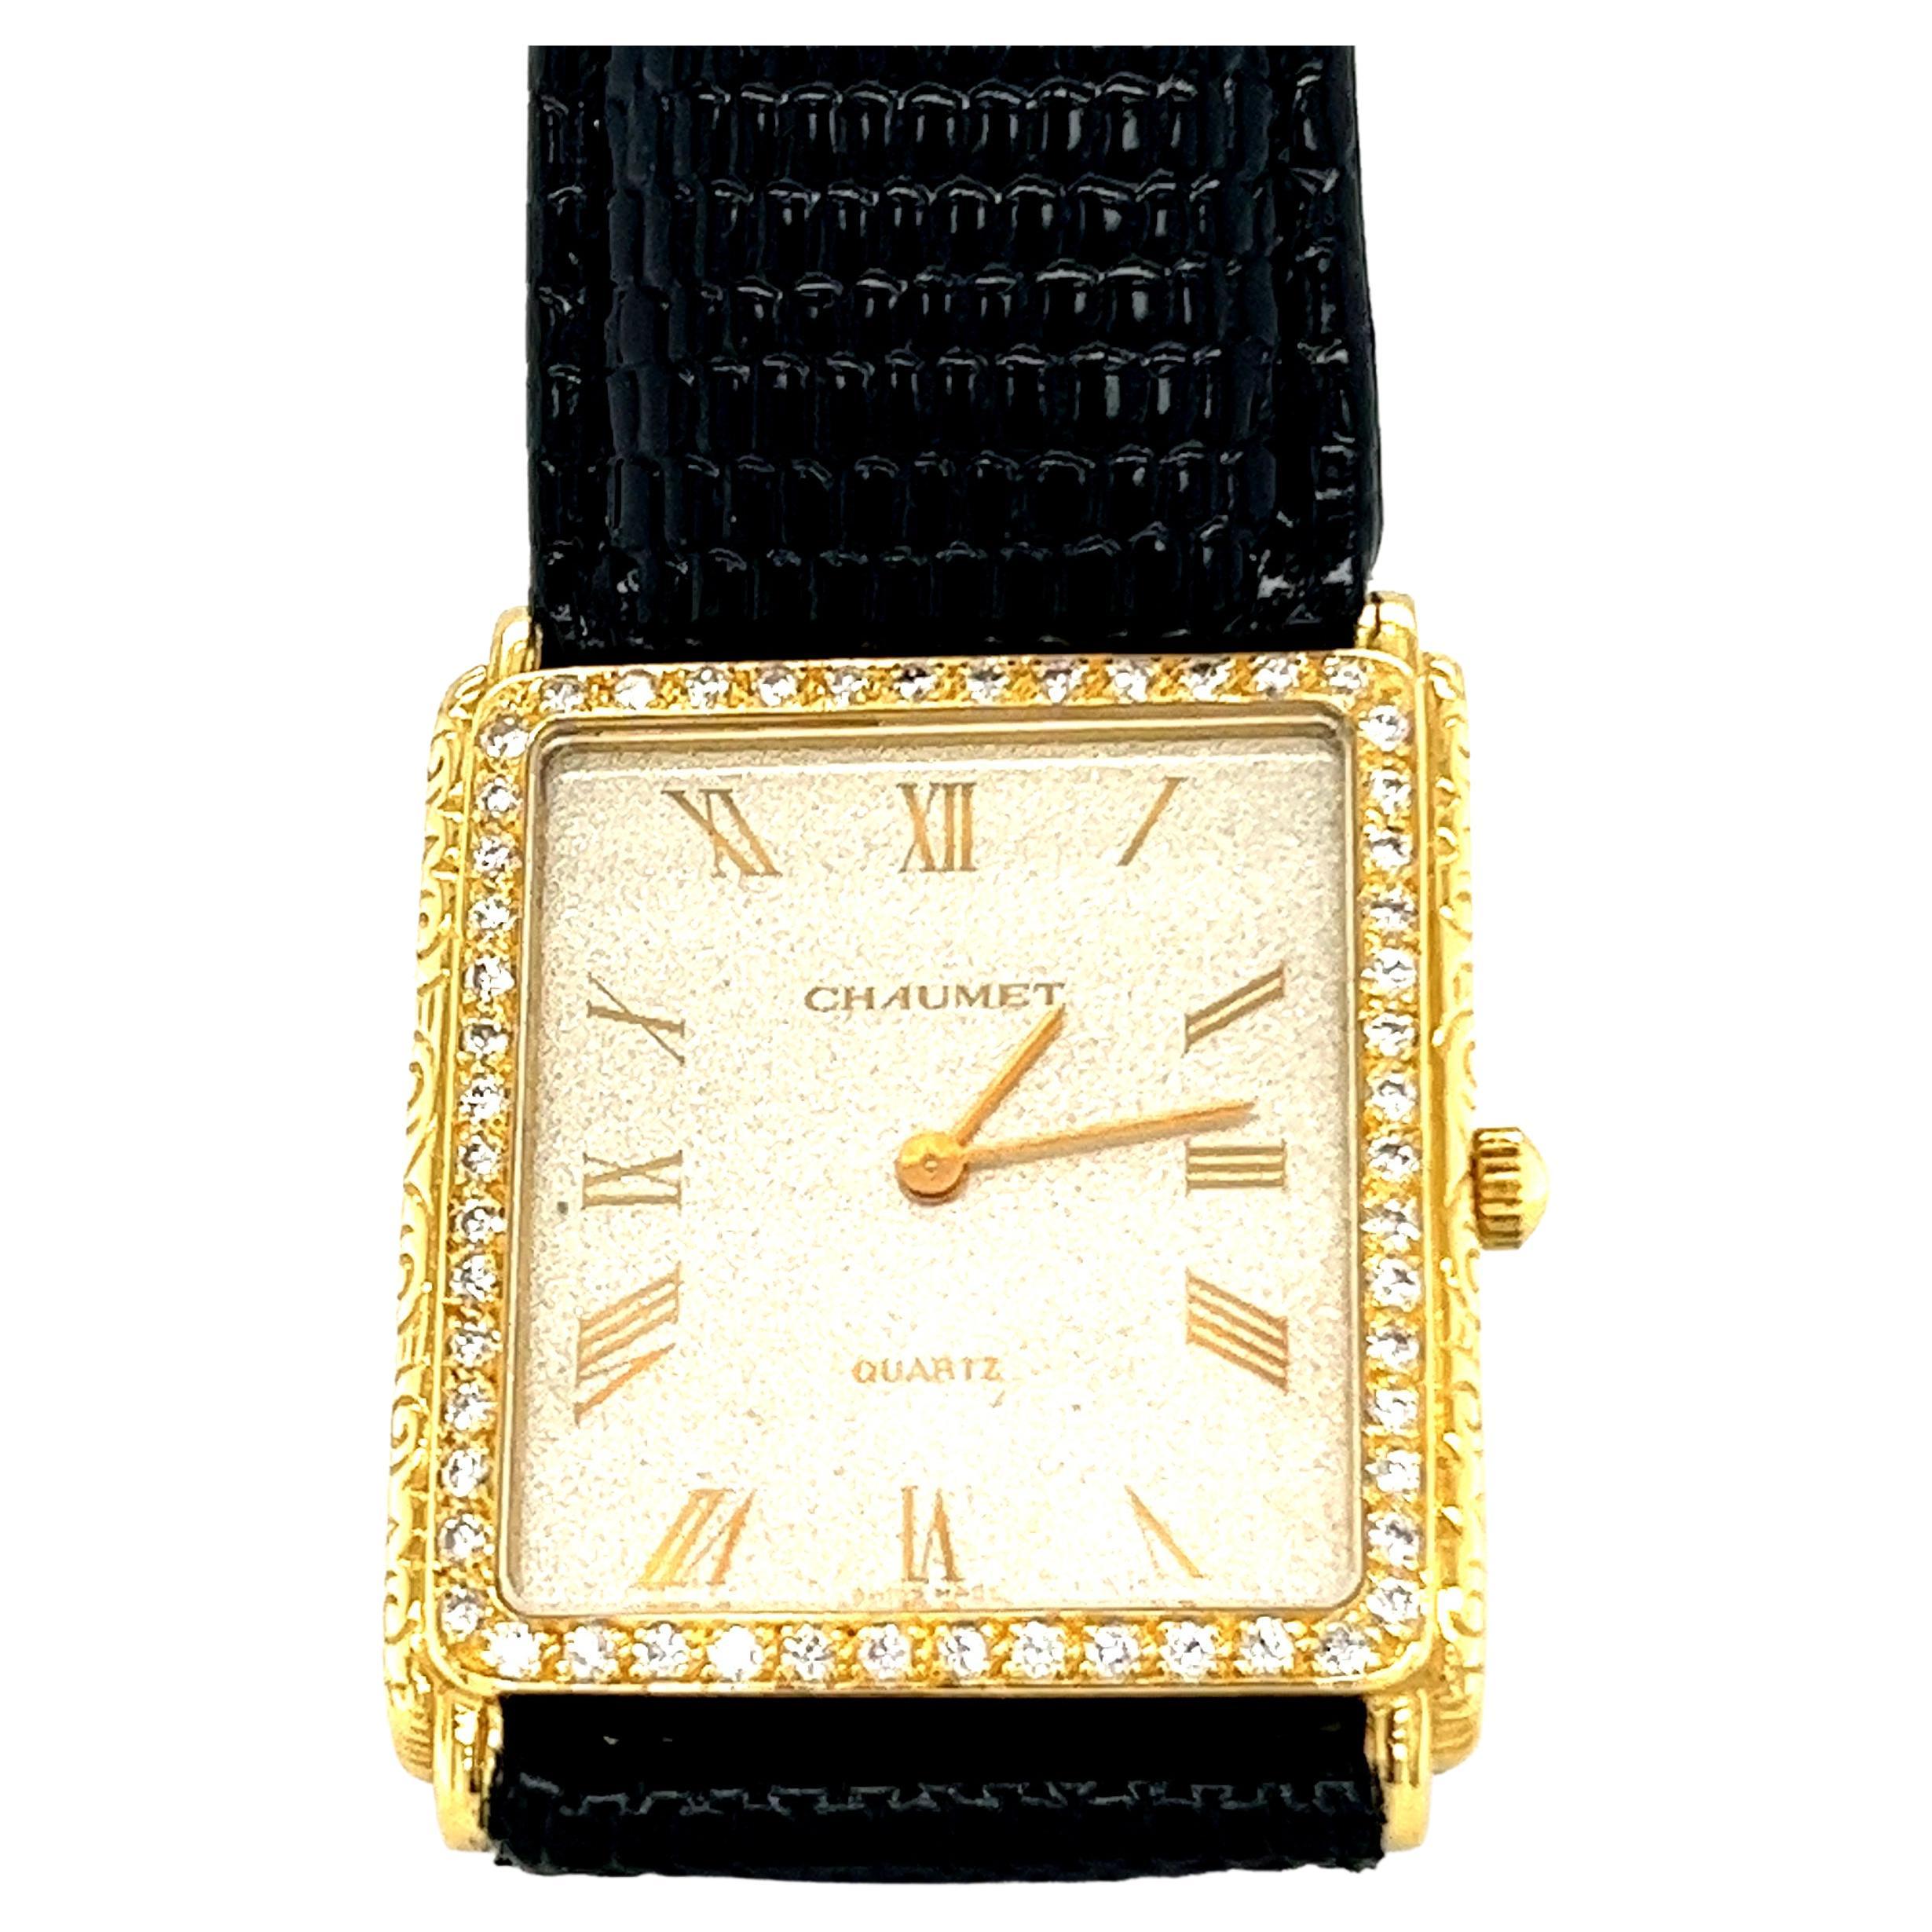 Classic elegant 18 karat yellow gold and diamond quartz ladies wrist watch by French house Chaumet.

Quartz movement ladies wrist watch featuring a rectangular 18 karat yellow gold case, laterally engraved with a floral pattern and the bezel set